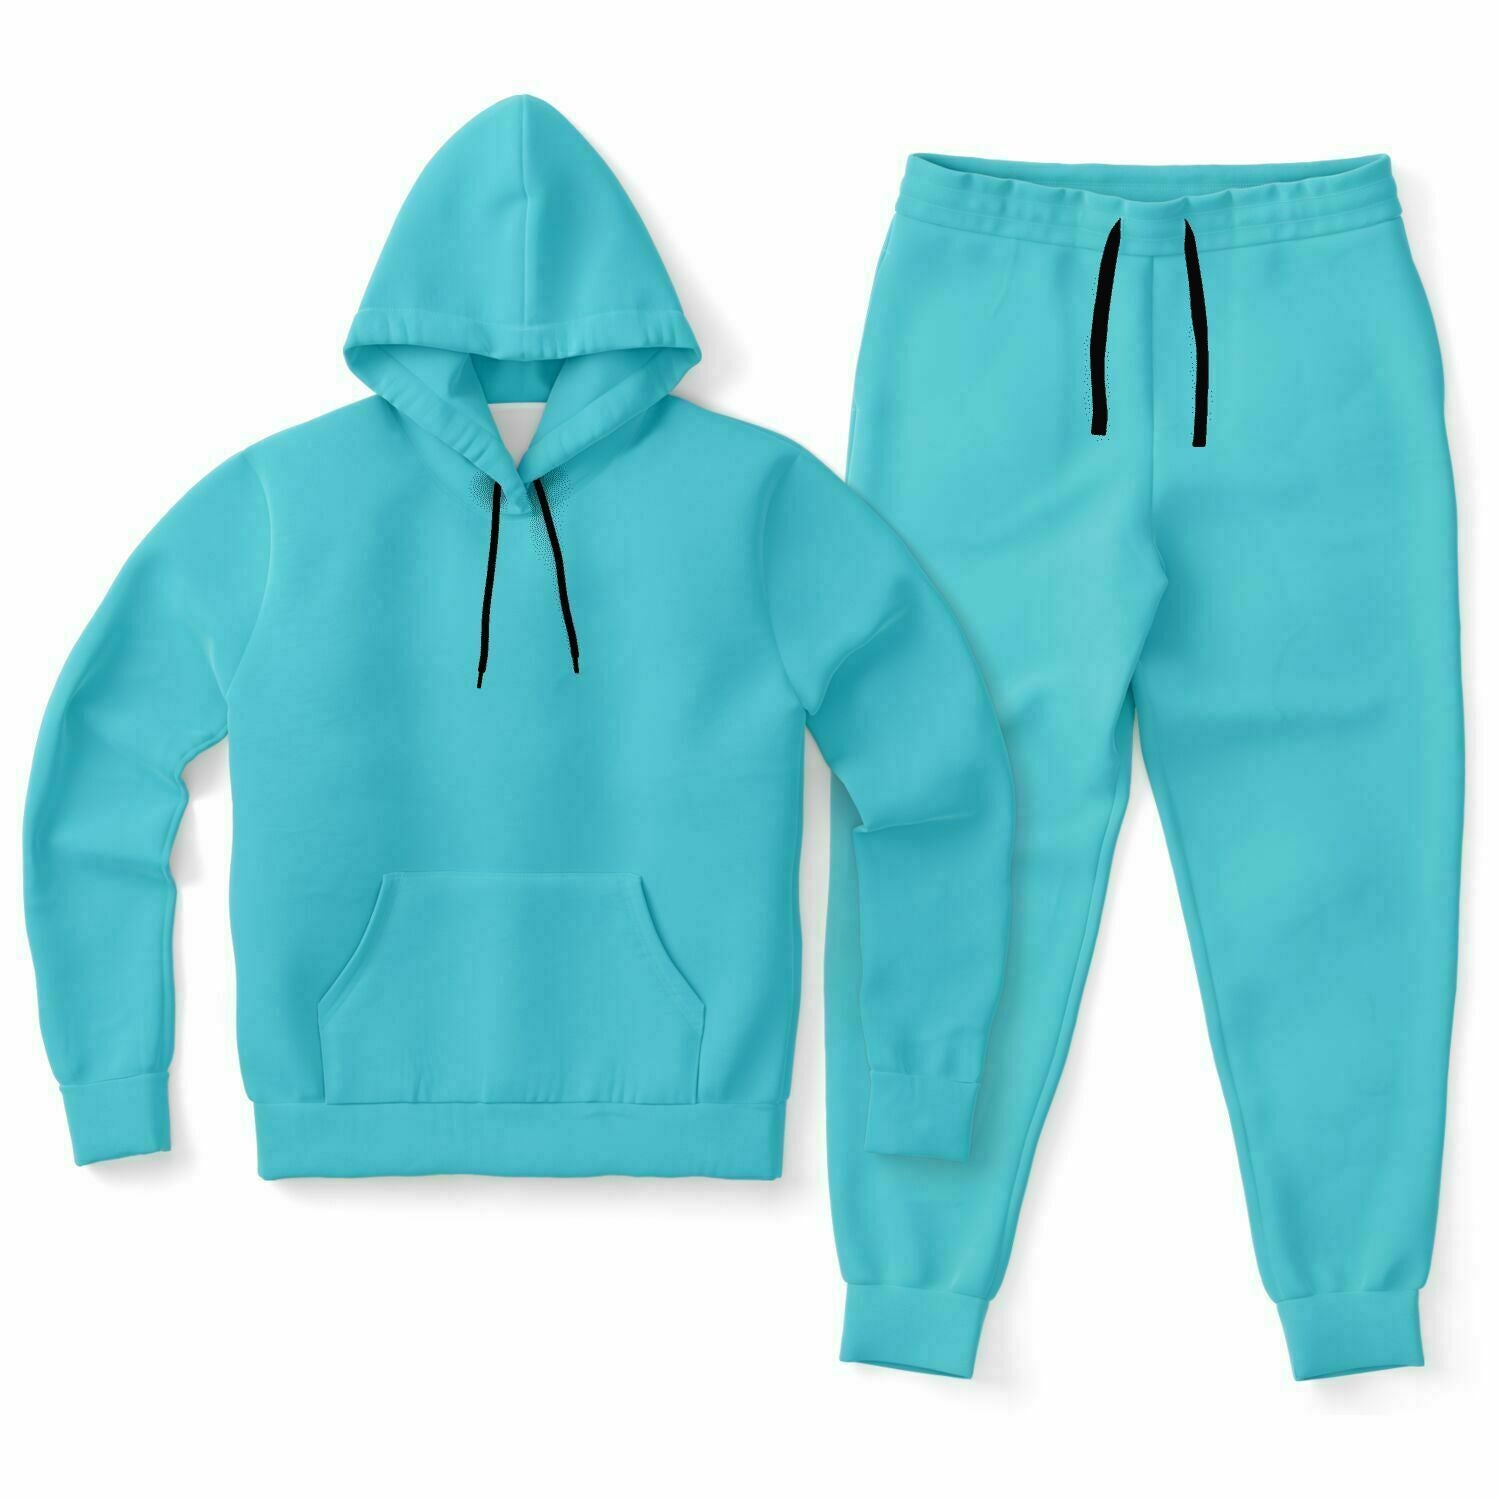 Ocean Blue Women's Hoodie and Jogger Set - XS / XS - Sport Finesse